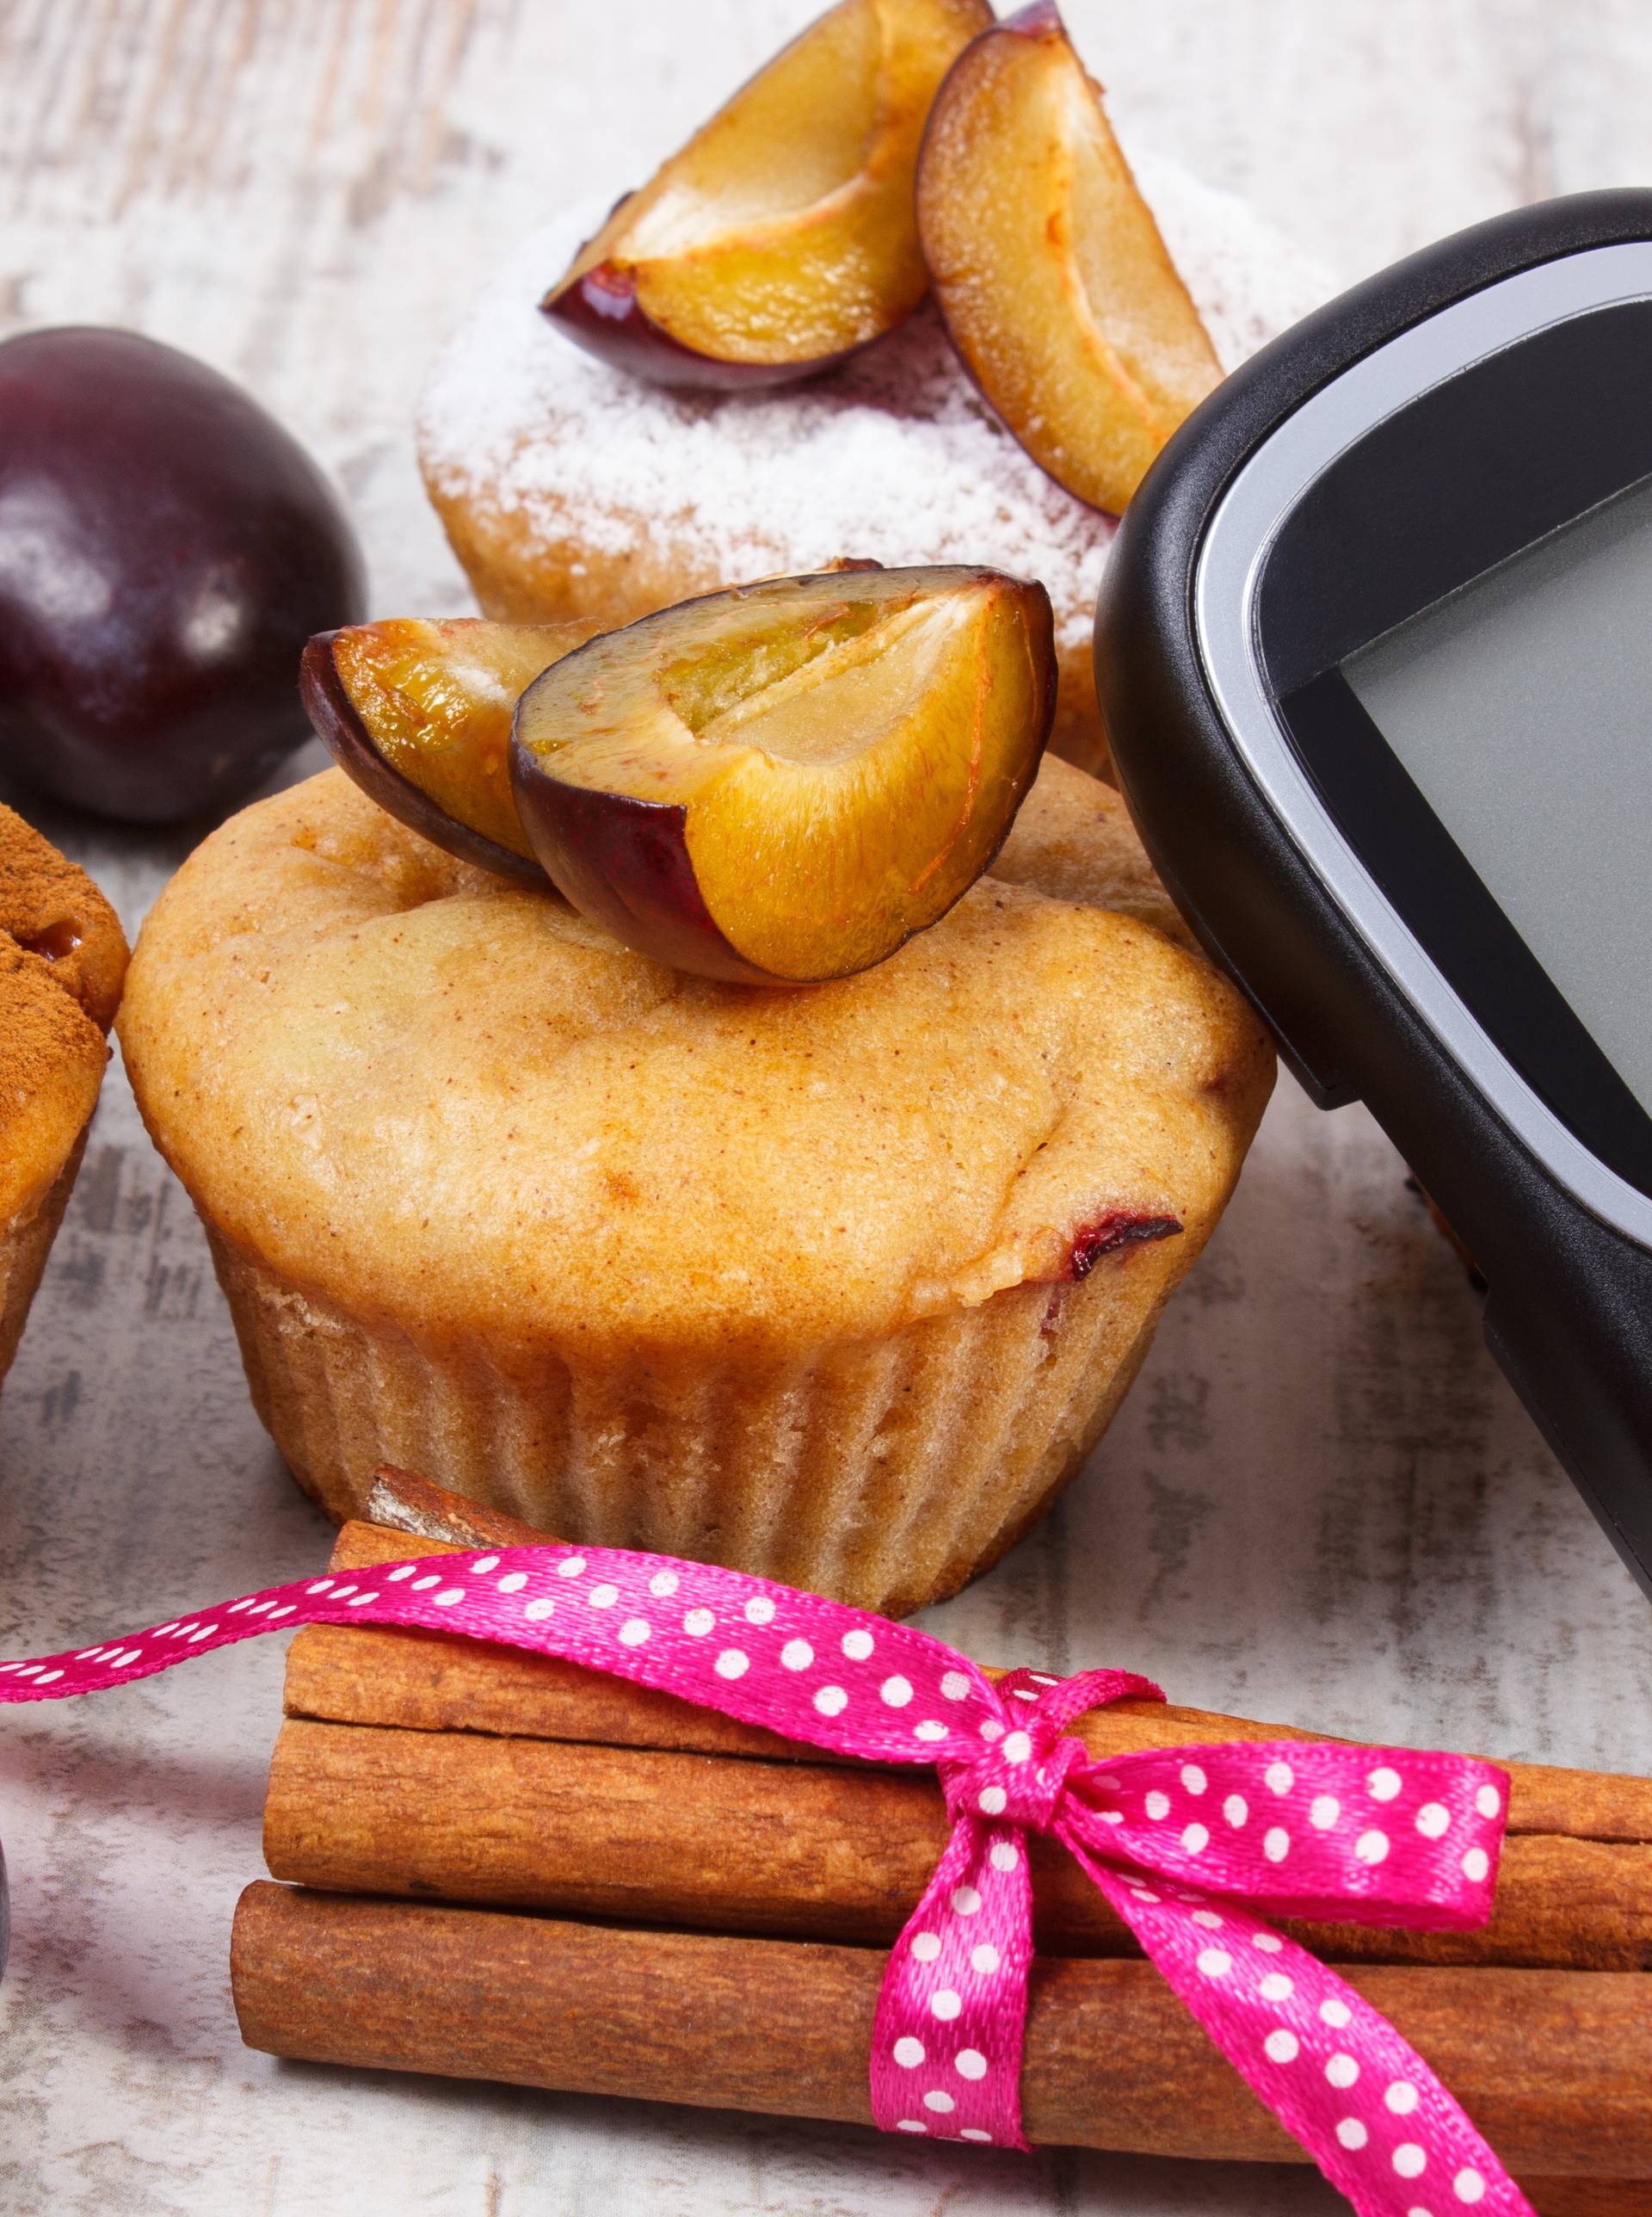 Glucometer, muffins with plums and cinnamon sticks, diabetes, delicious dessert